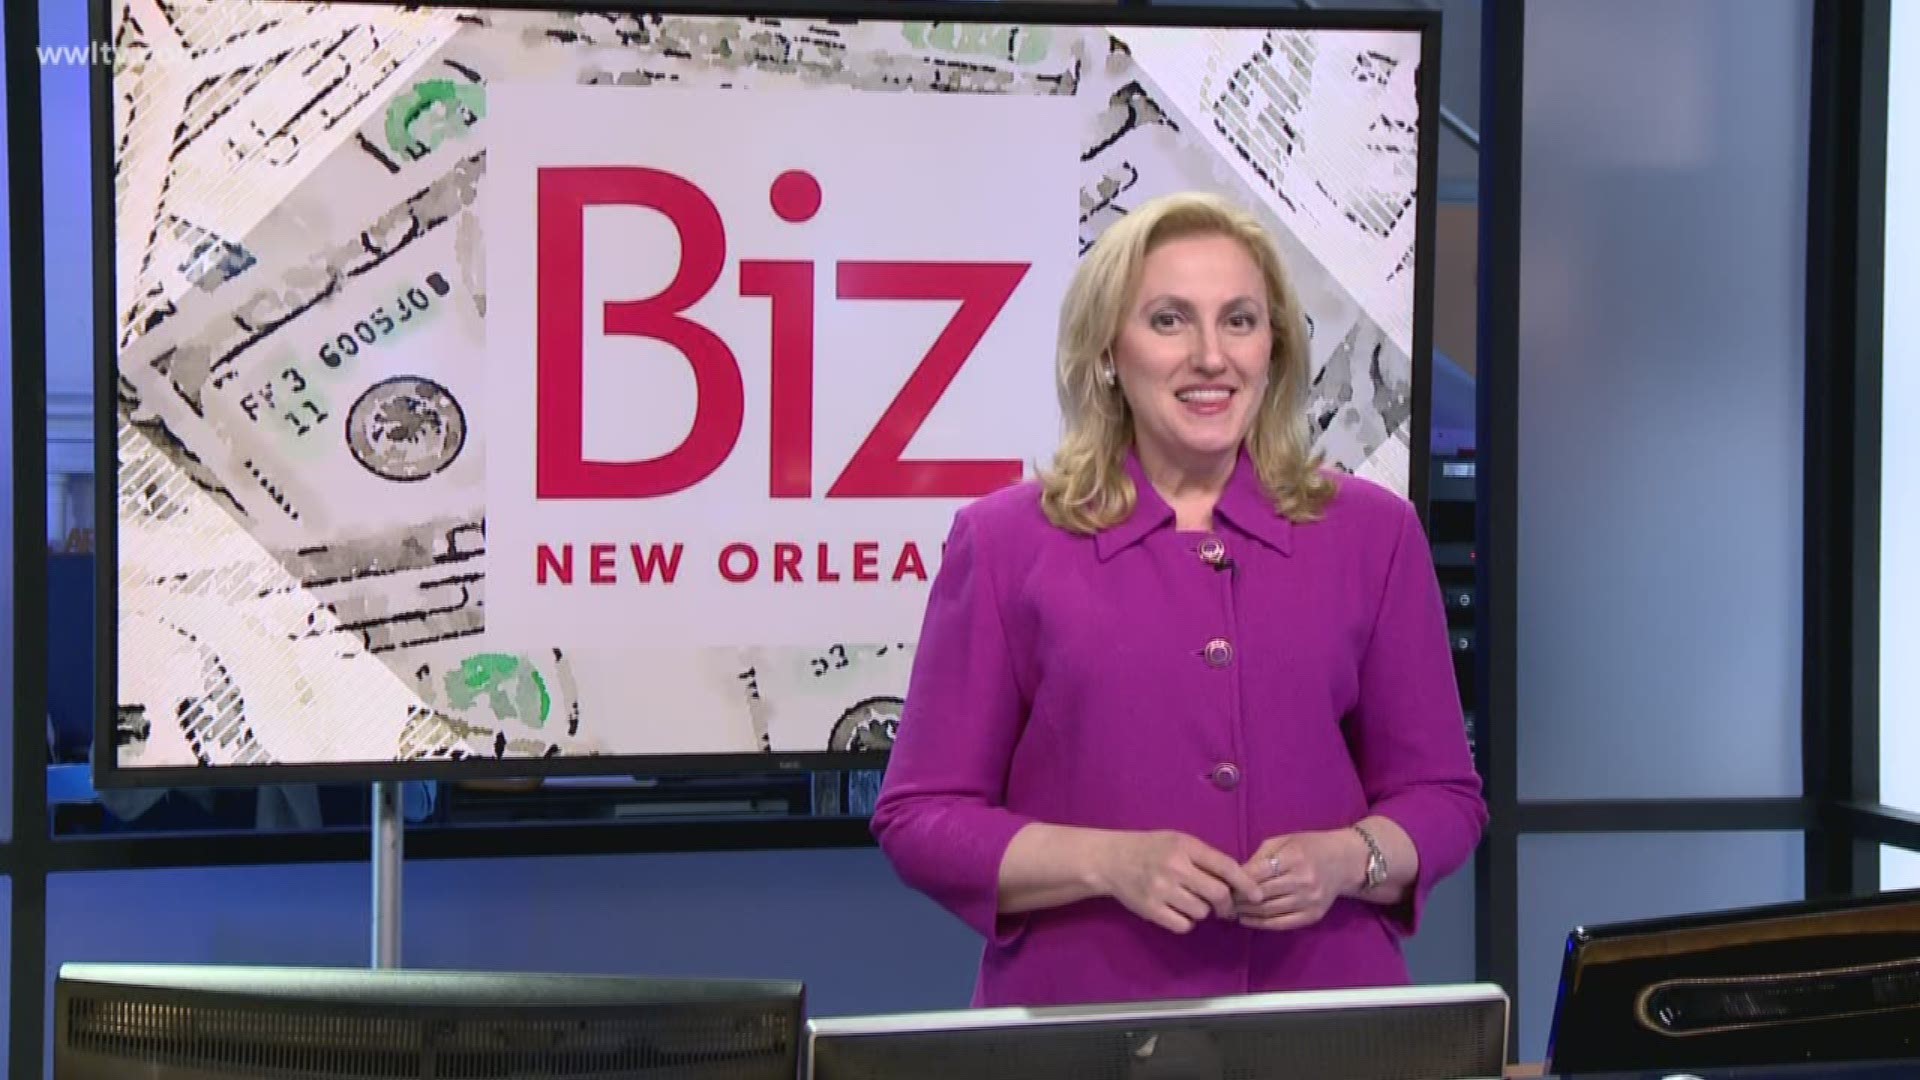 There is such a thing as a debt-free vacation. It may sound too good to be true, but Biz New Orleans' Leslie Snadowsky says it can be your reality with a little bit of planning.